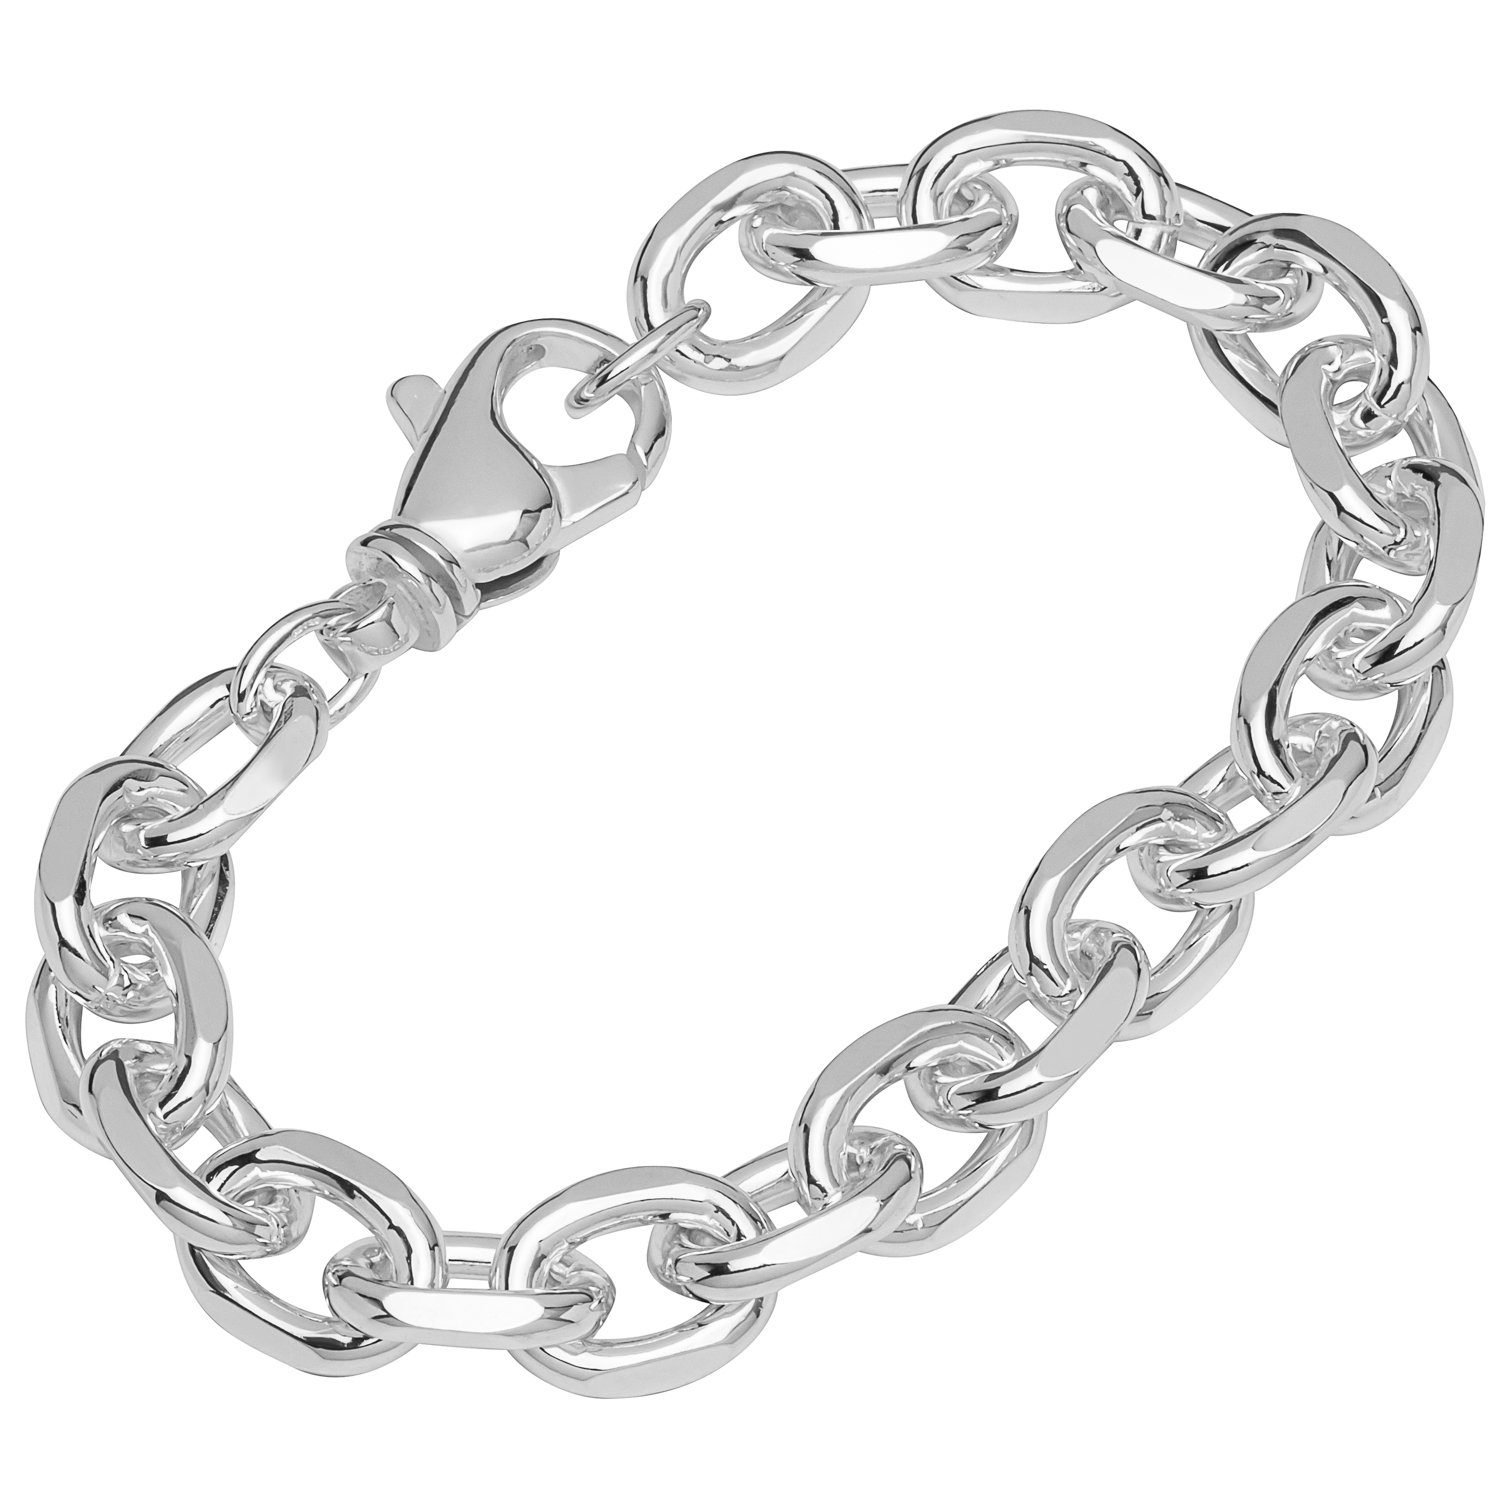 NKlaus Silberarmband 925 Armband Germany Sterling 19cm Made Ankerkette fach 4 Stück), Silber (1 in